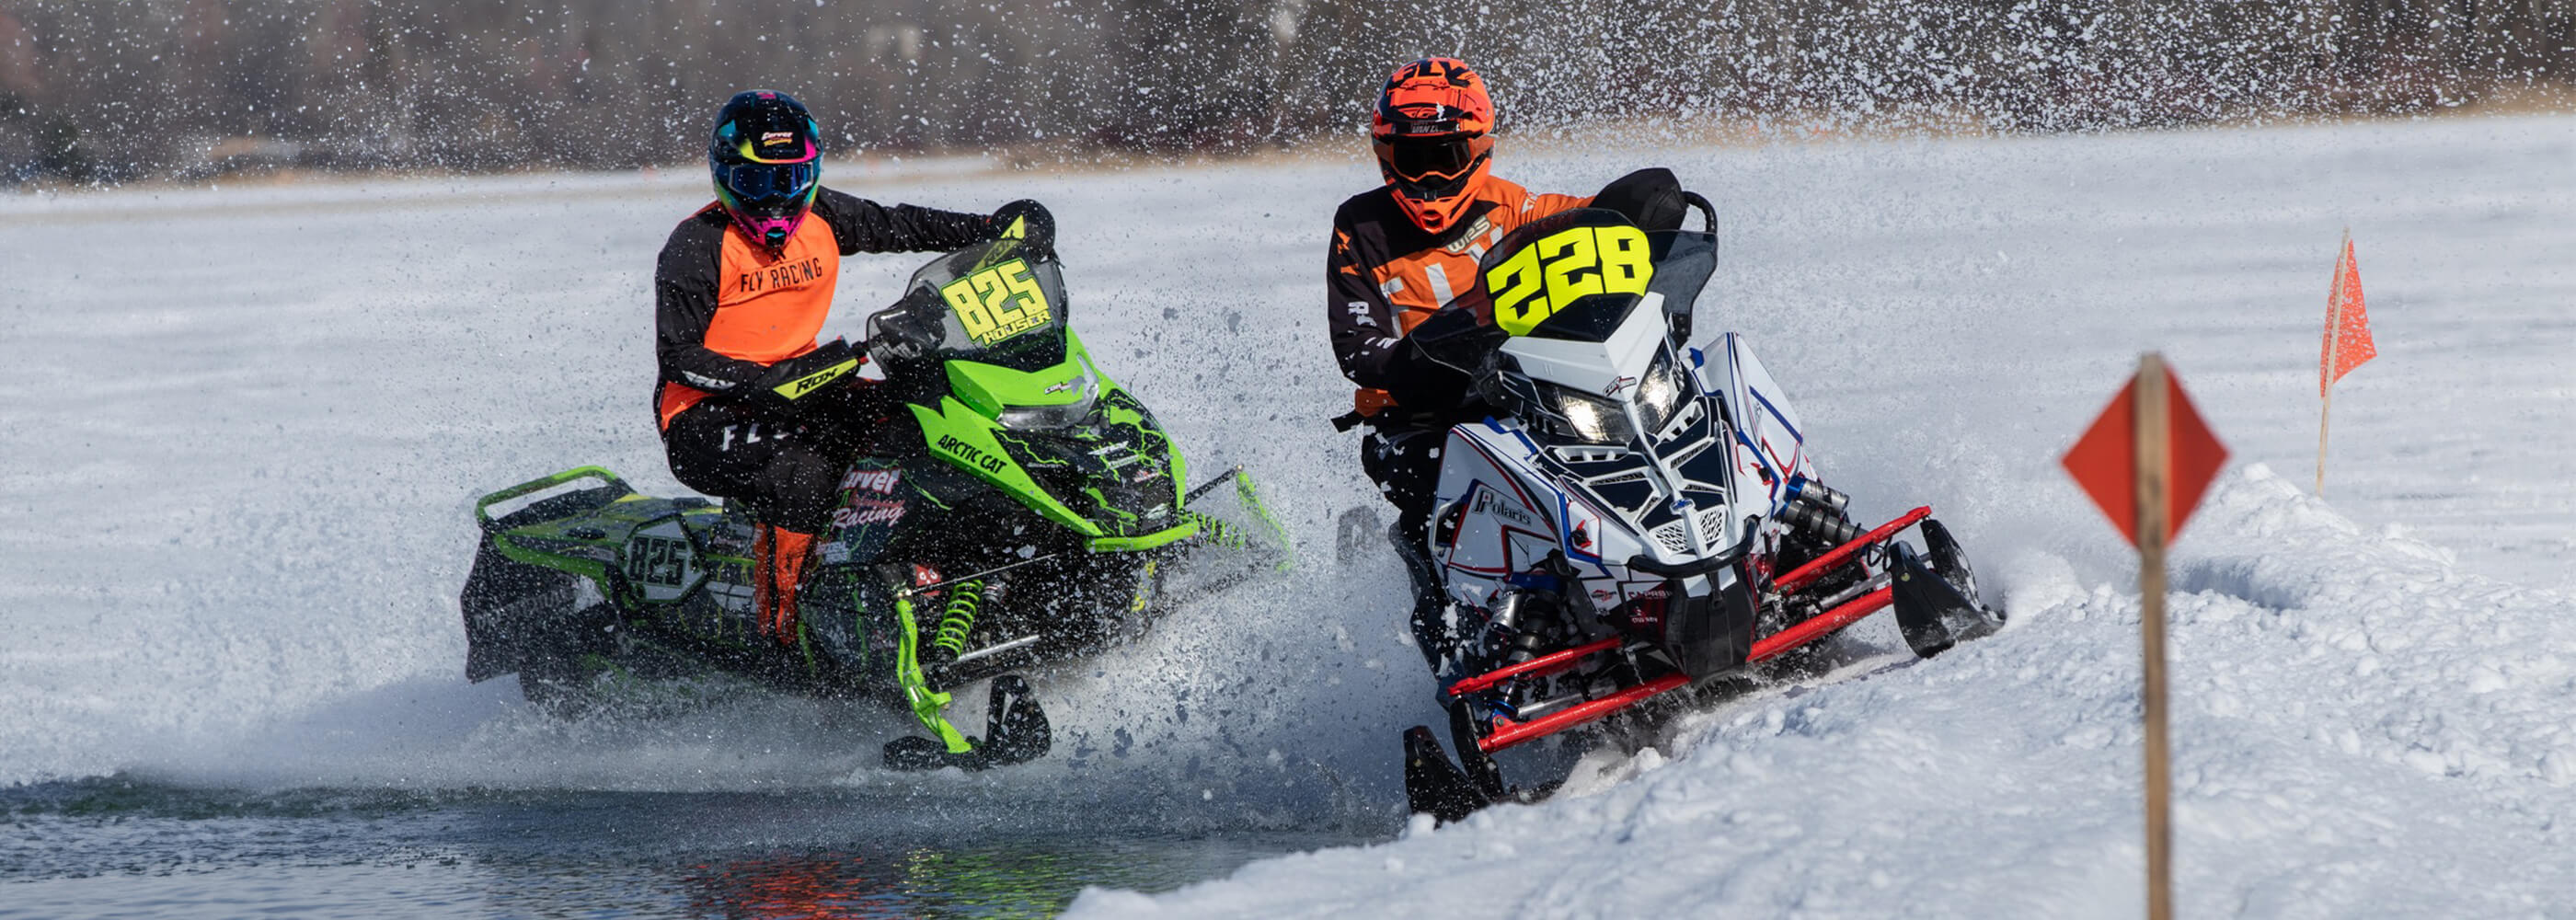 Two cross country snowmobile racers from Cor Powersports with C&A Pro skis